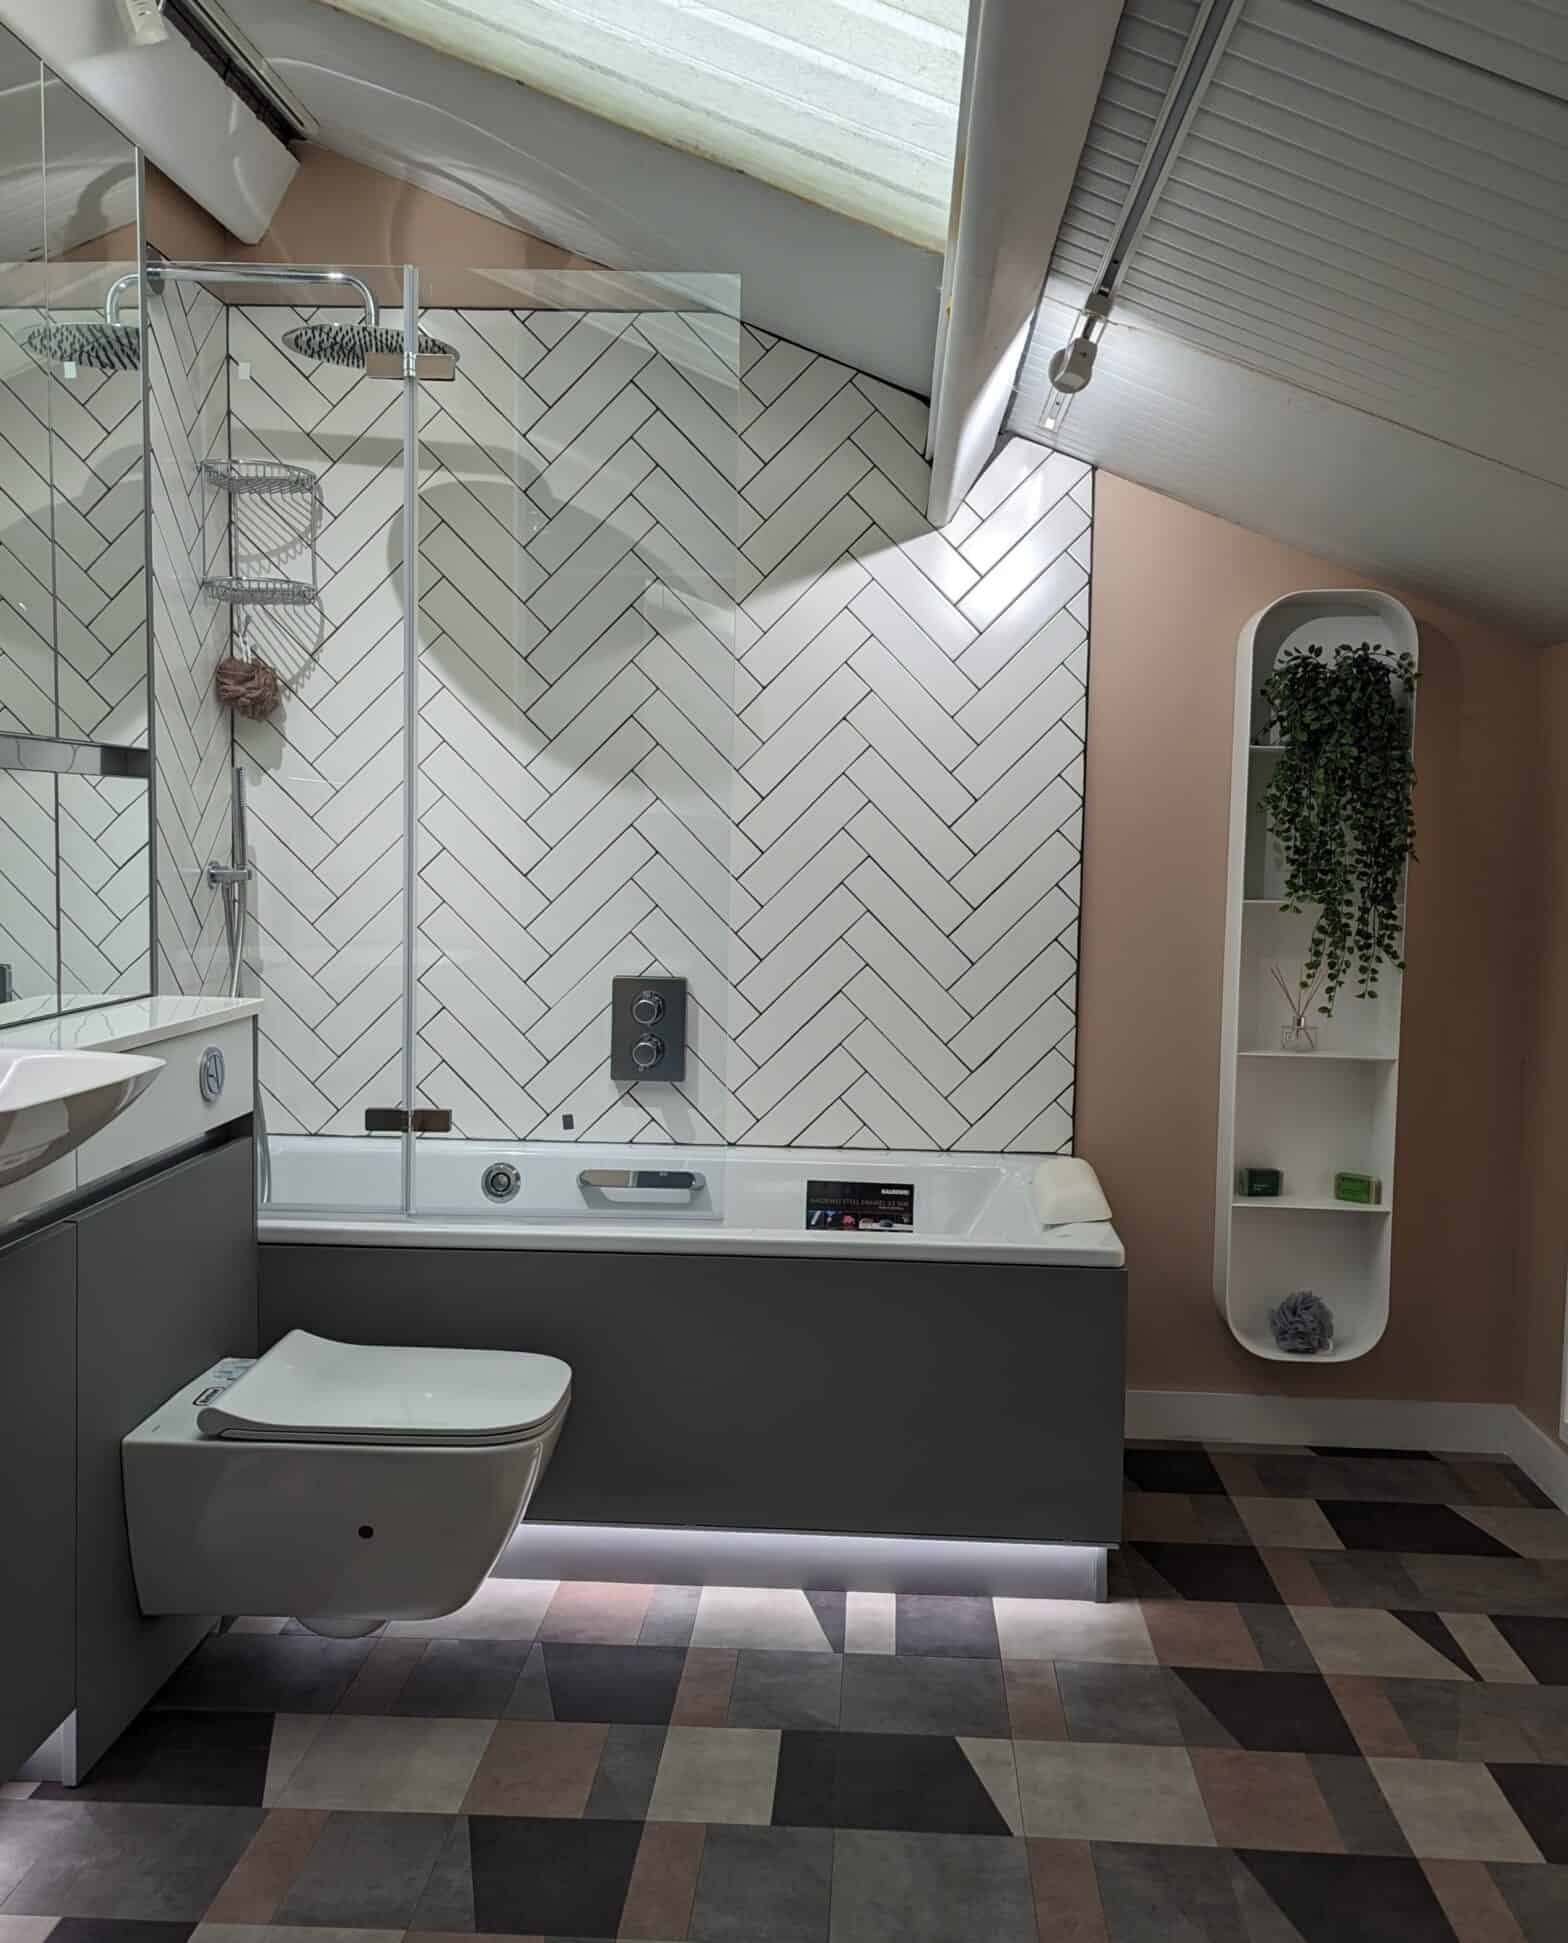 A bathroom with pink painted walls, white tiling in a herringbone pattern and a combination of grey and mirrored furniture.